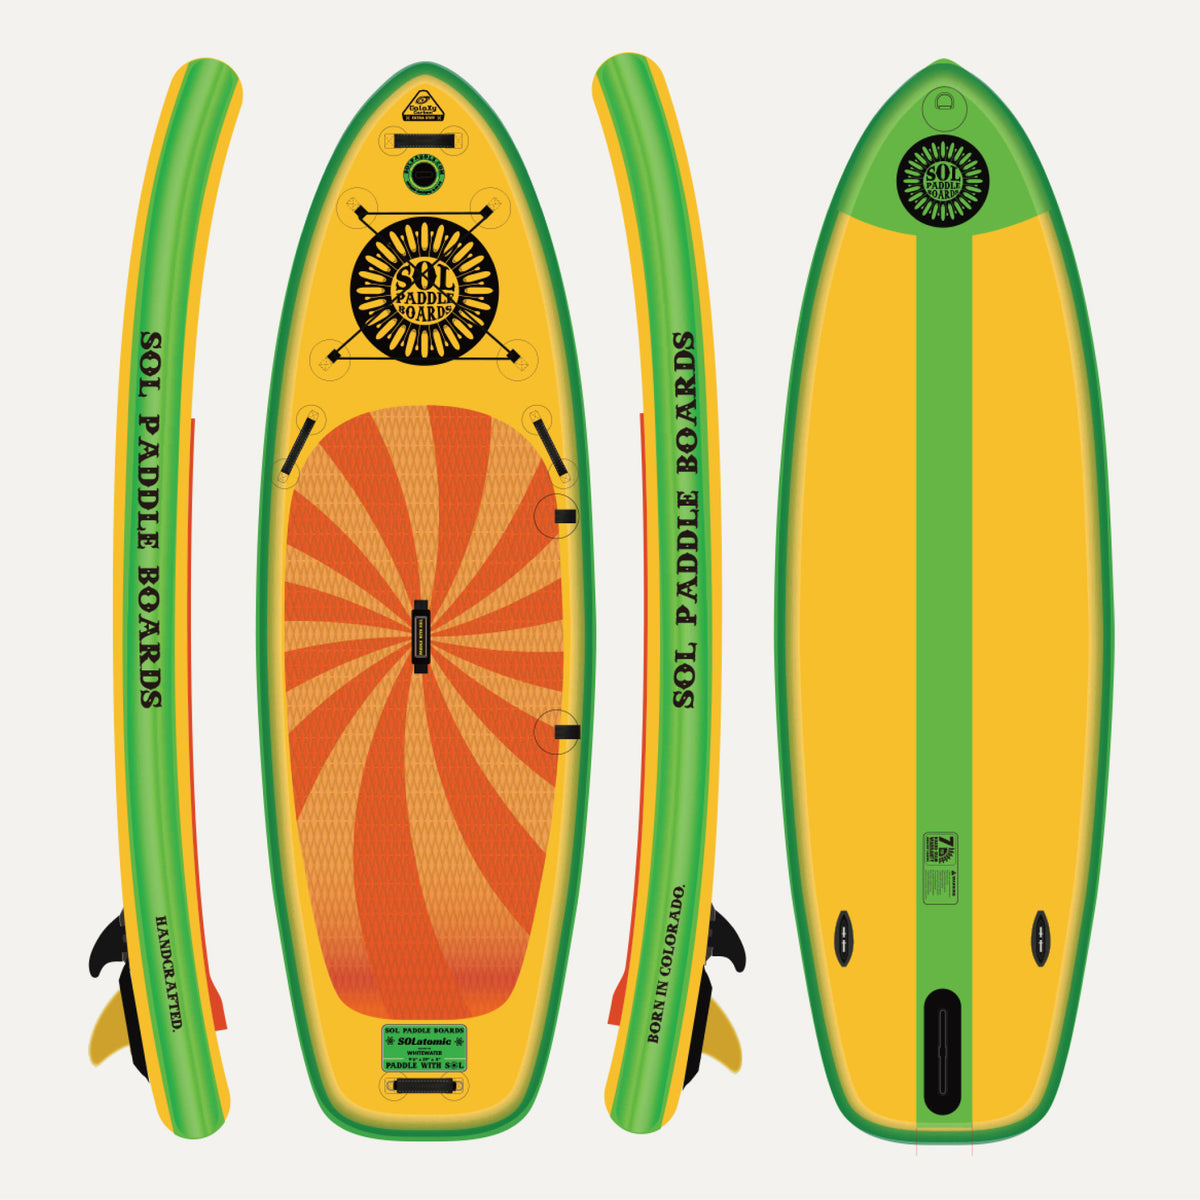 SOLlynx Inflatable Paddle Board  A Bold All-Around SUP Board